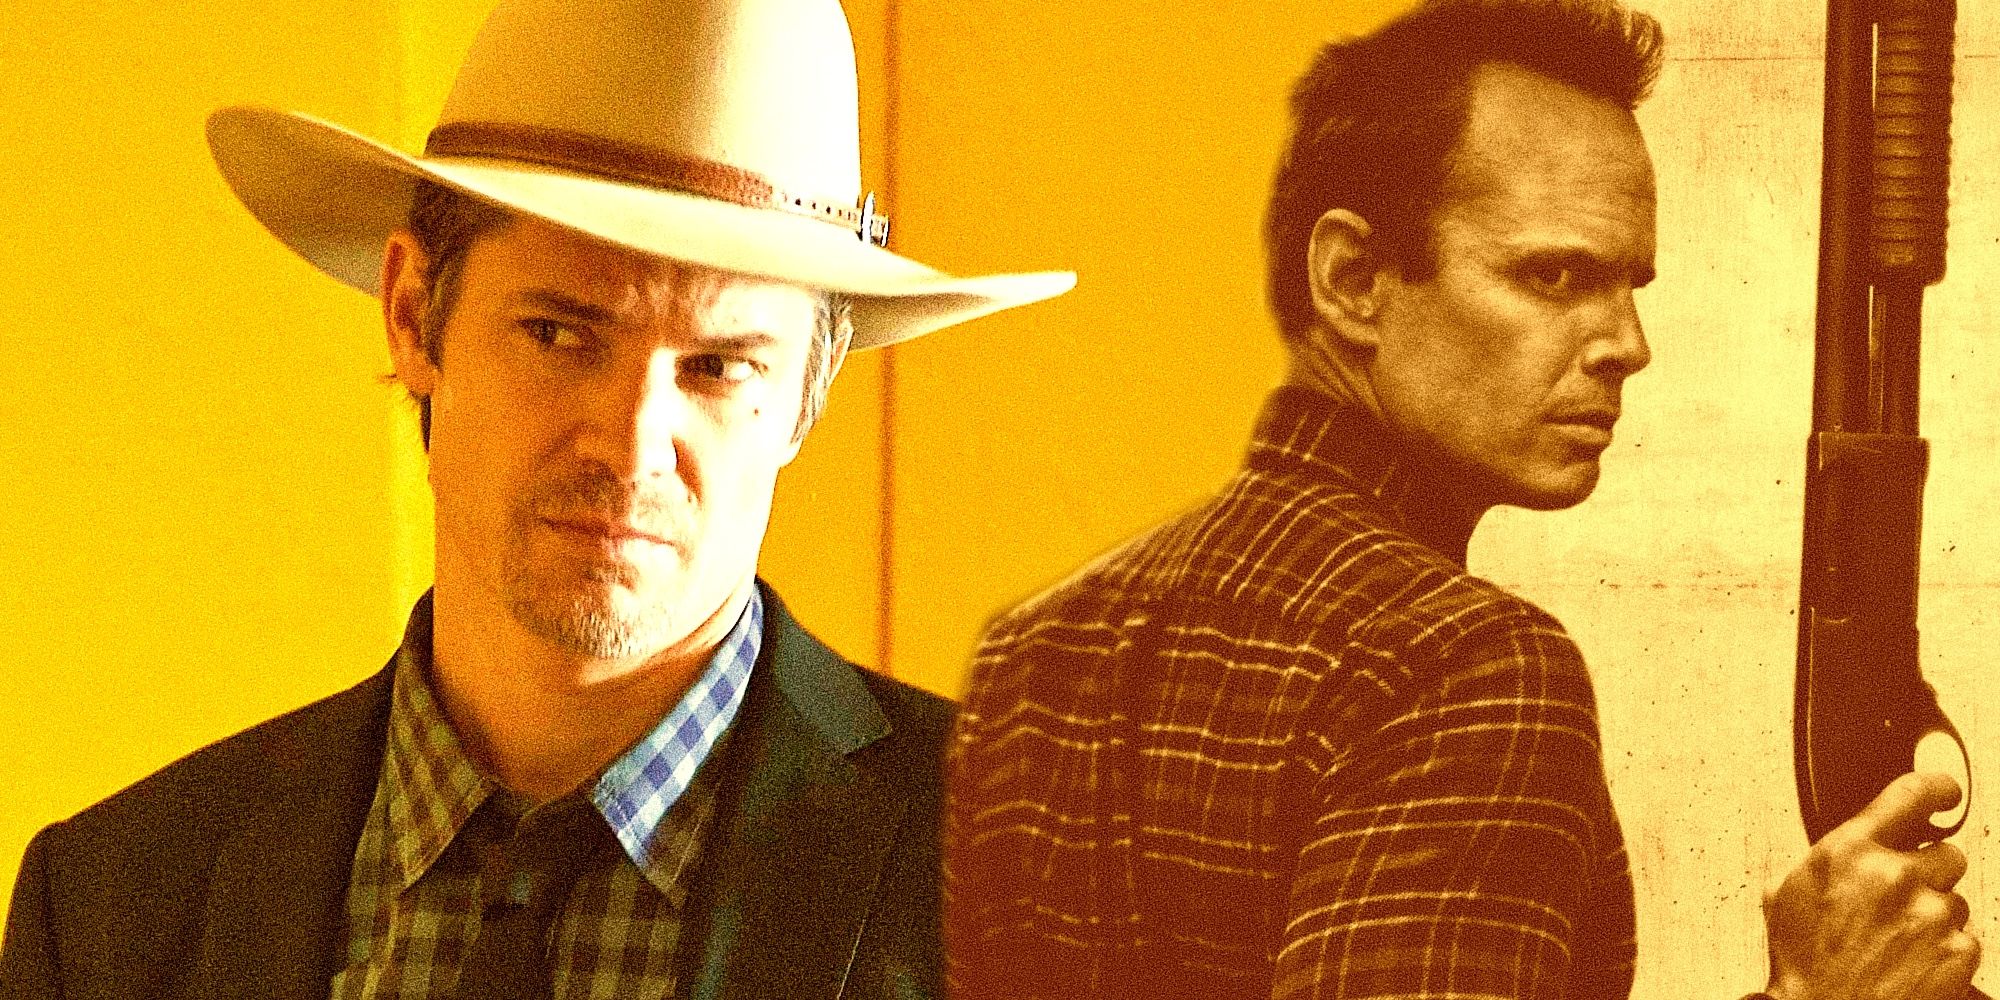 why justified ended after season 6 was it canceled?